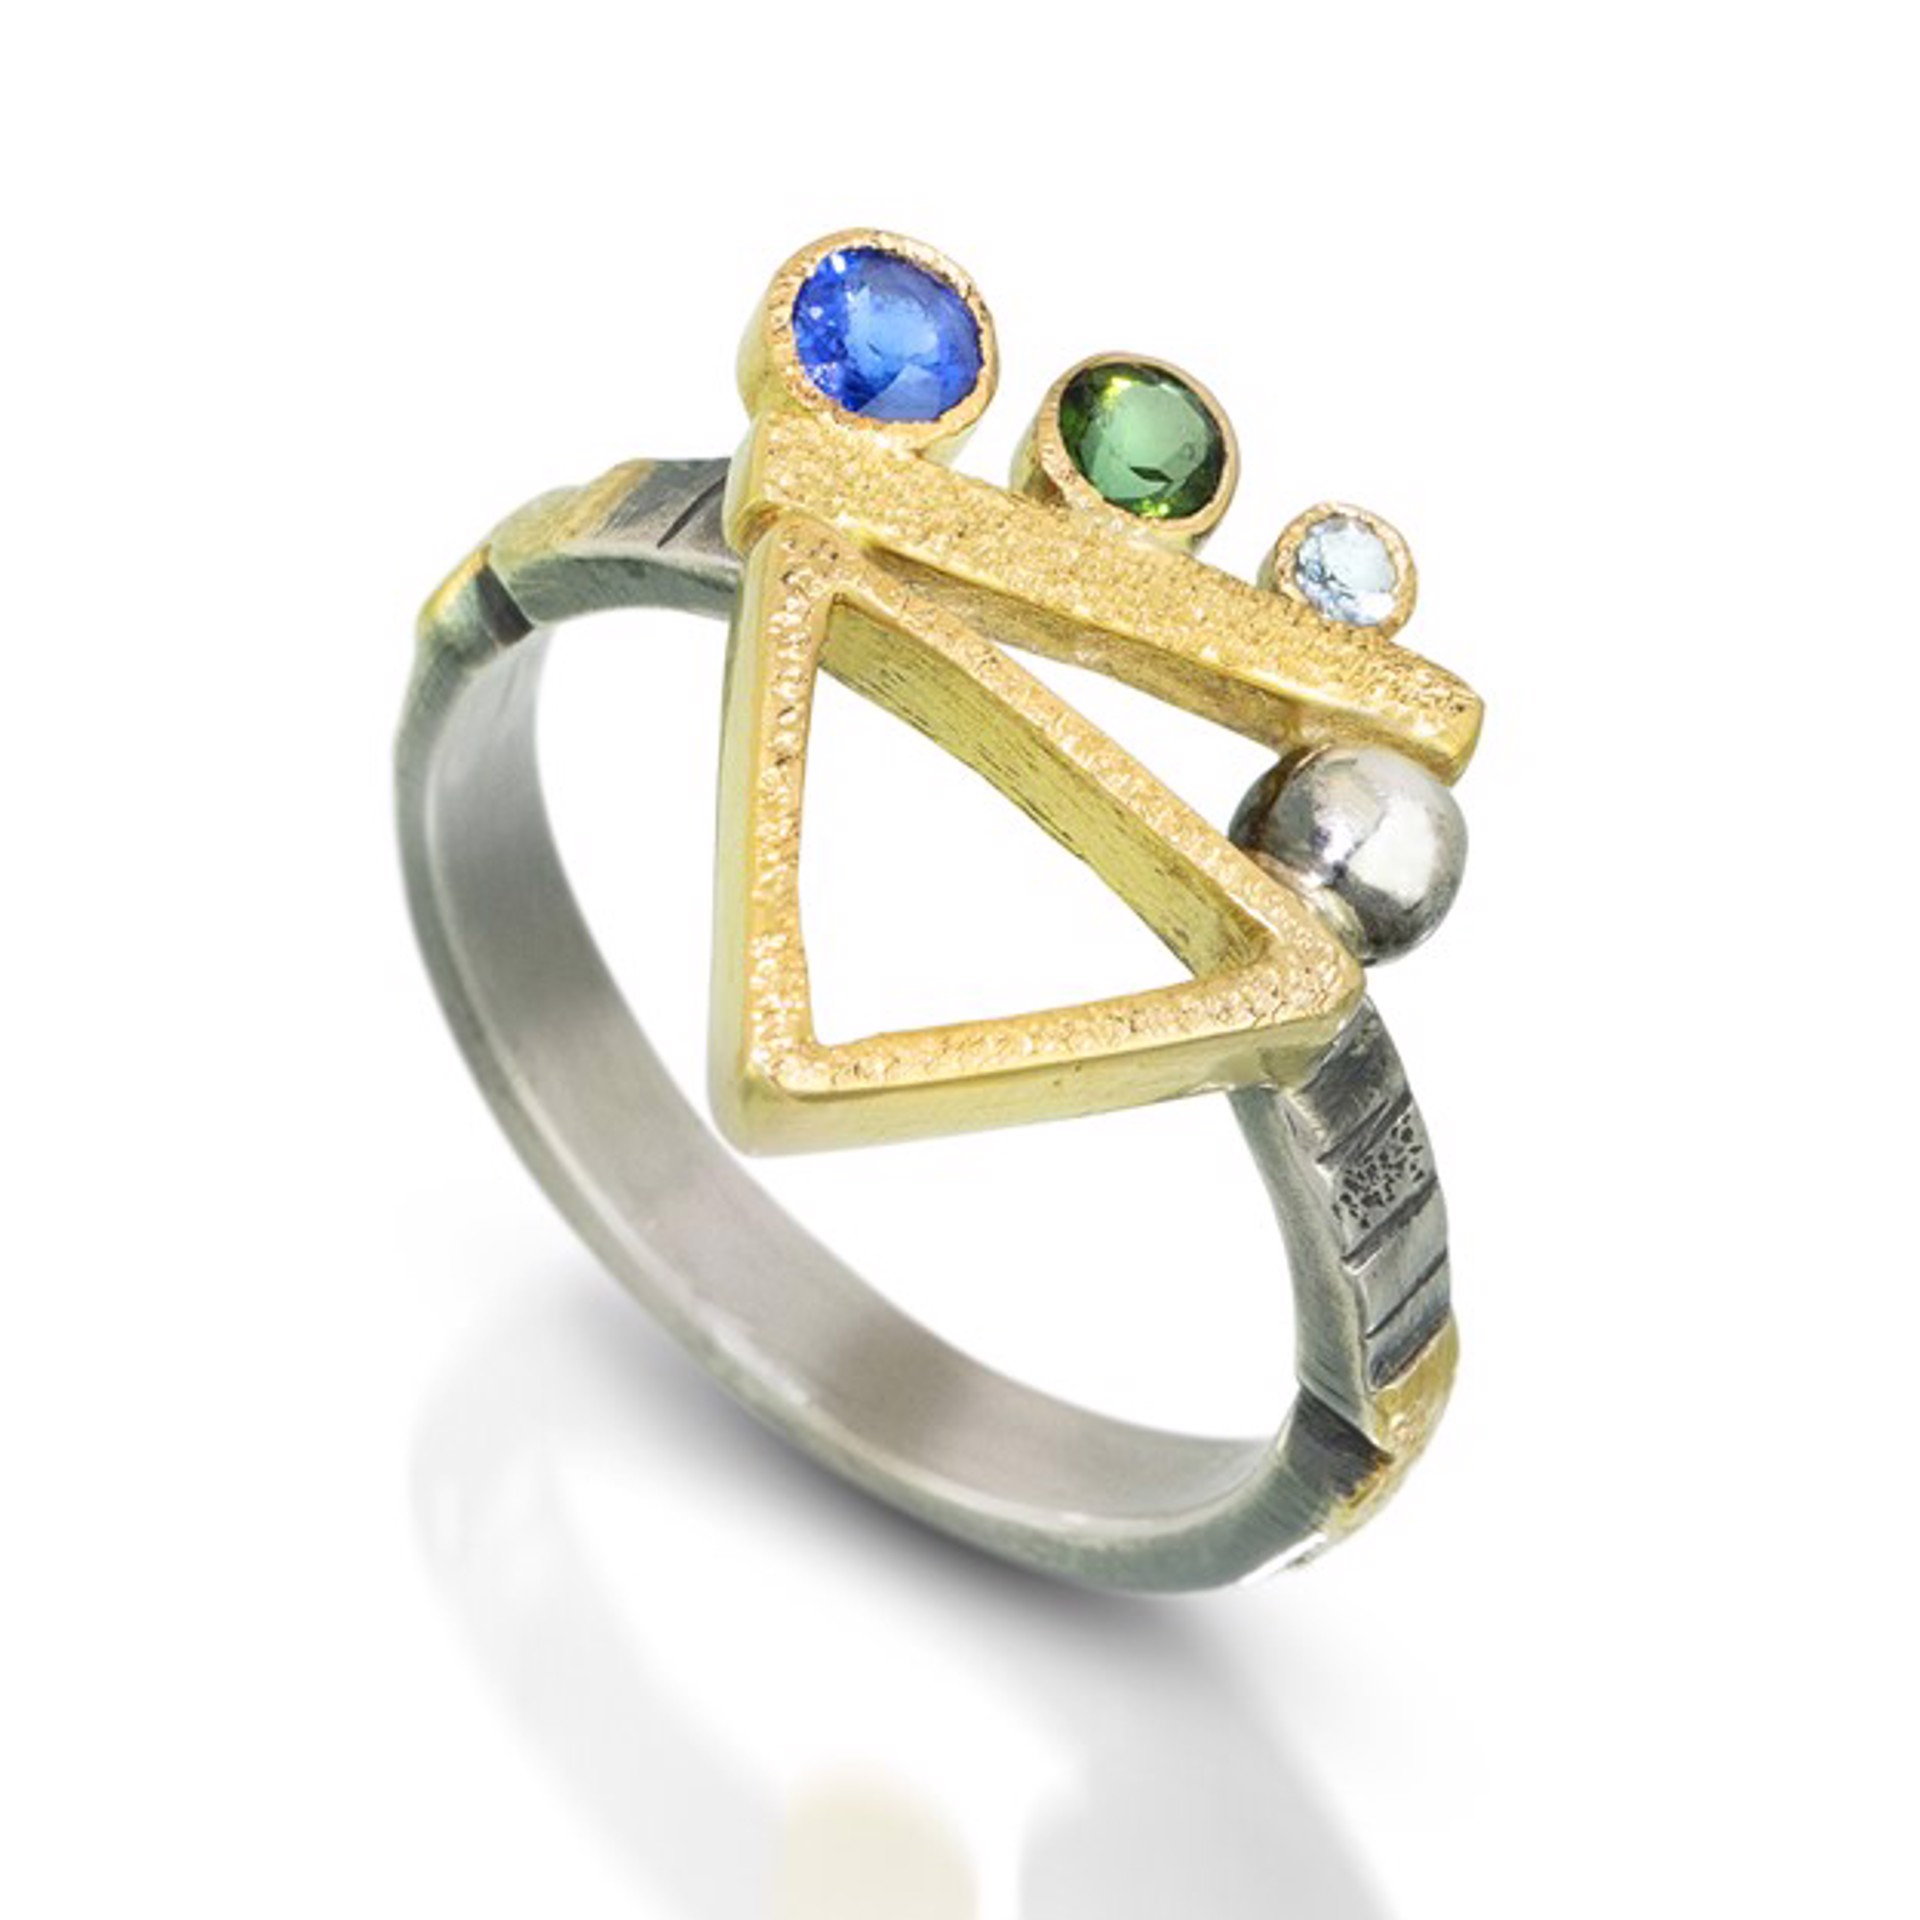 Triangle Ring with Three Stones by Karla Hackman